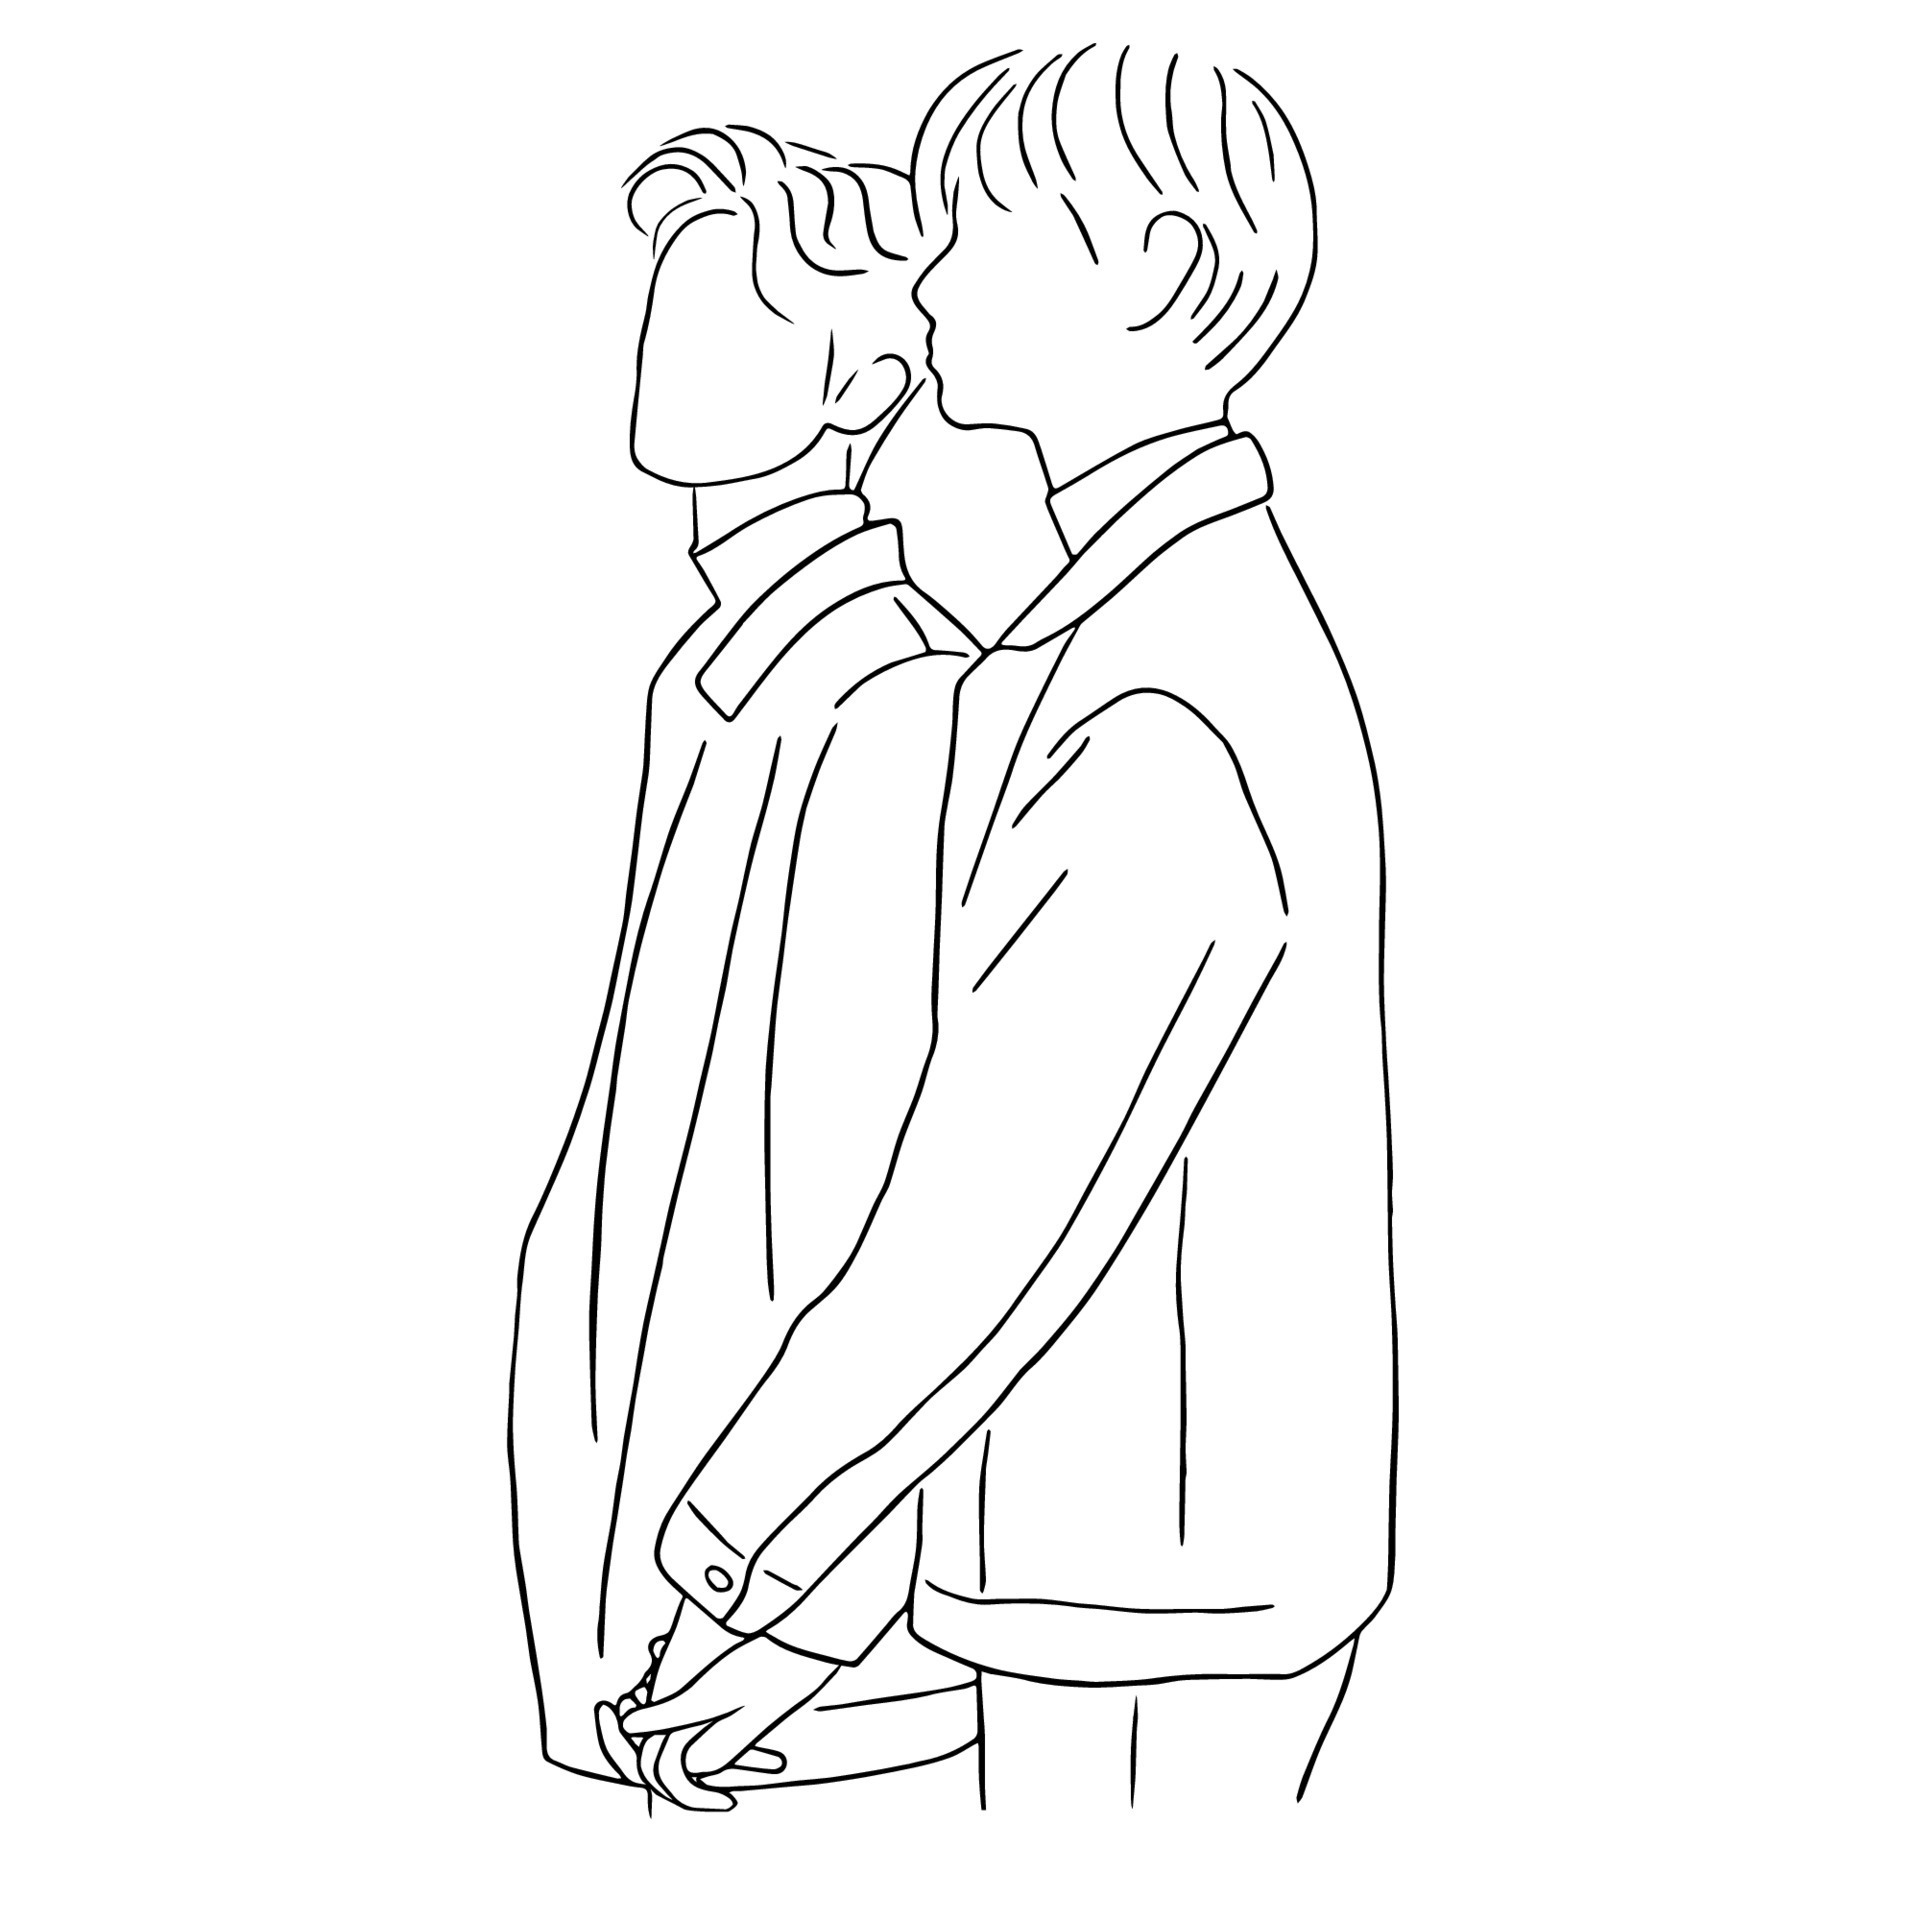 Line Art Minimal Of Gay Couple Holding Hands Together In Hand Drawn Love Concept For Decoration